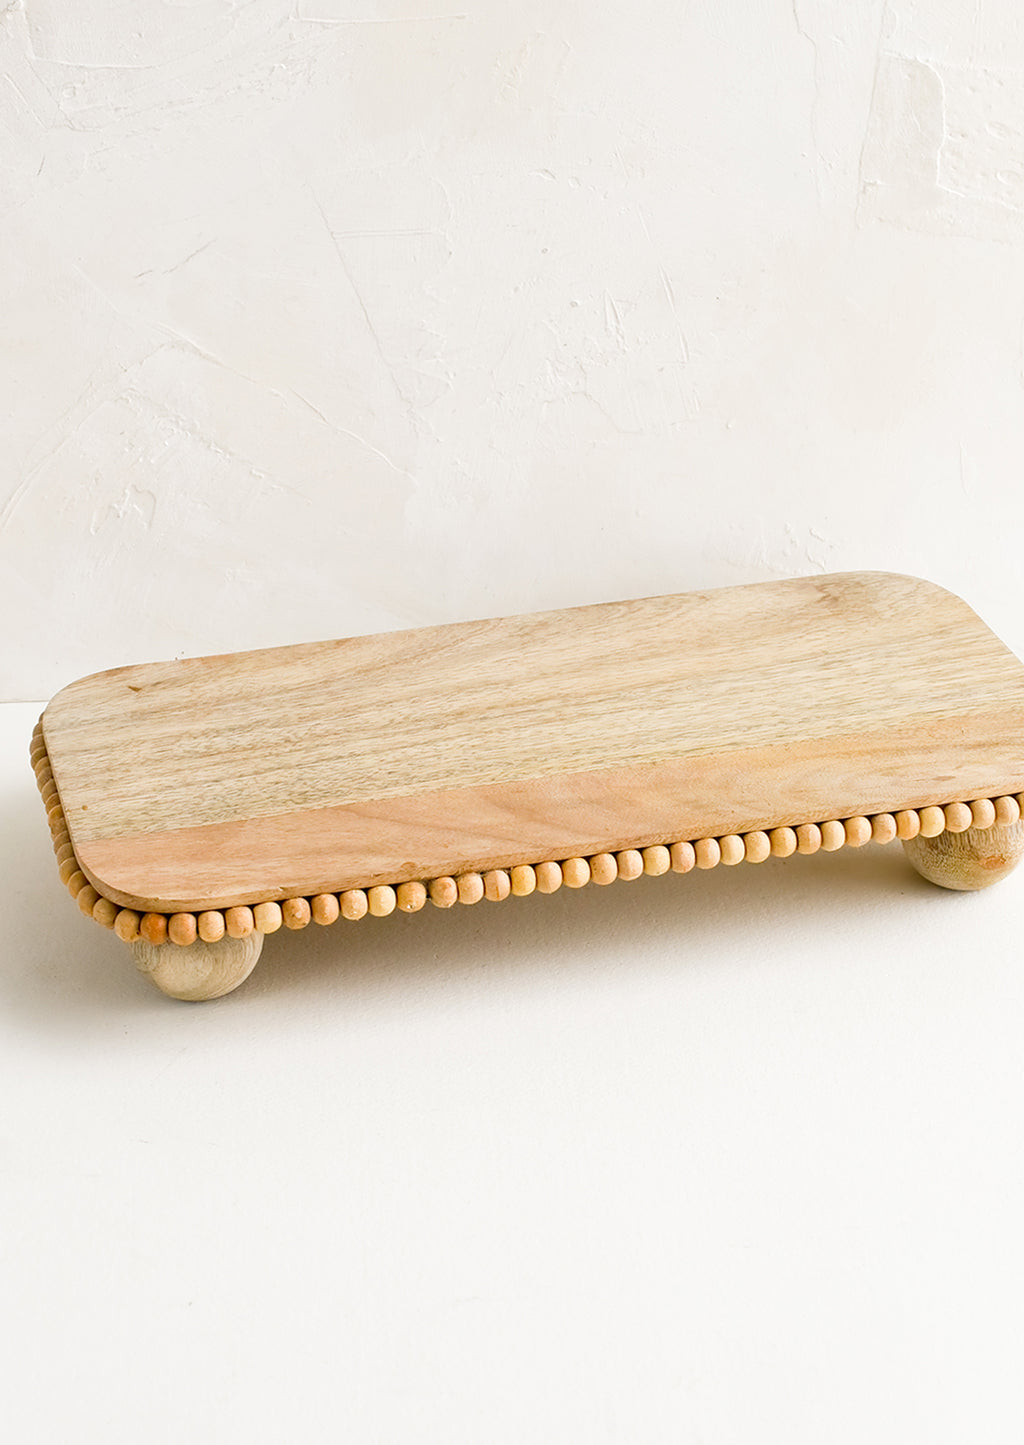 2: A rectangular wooden riser with round feet and beaded detail.